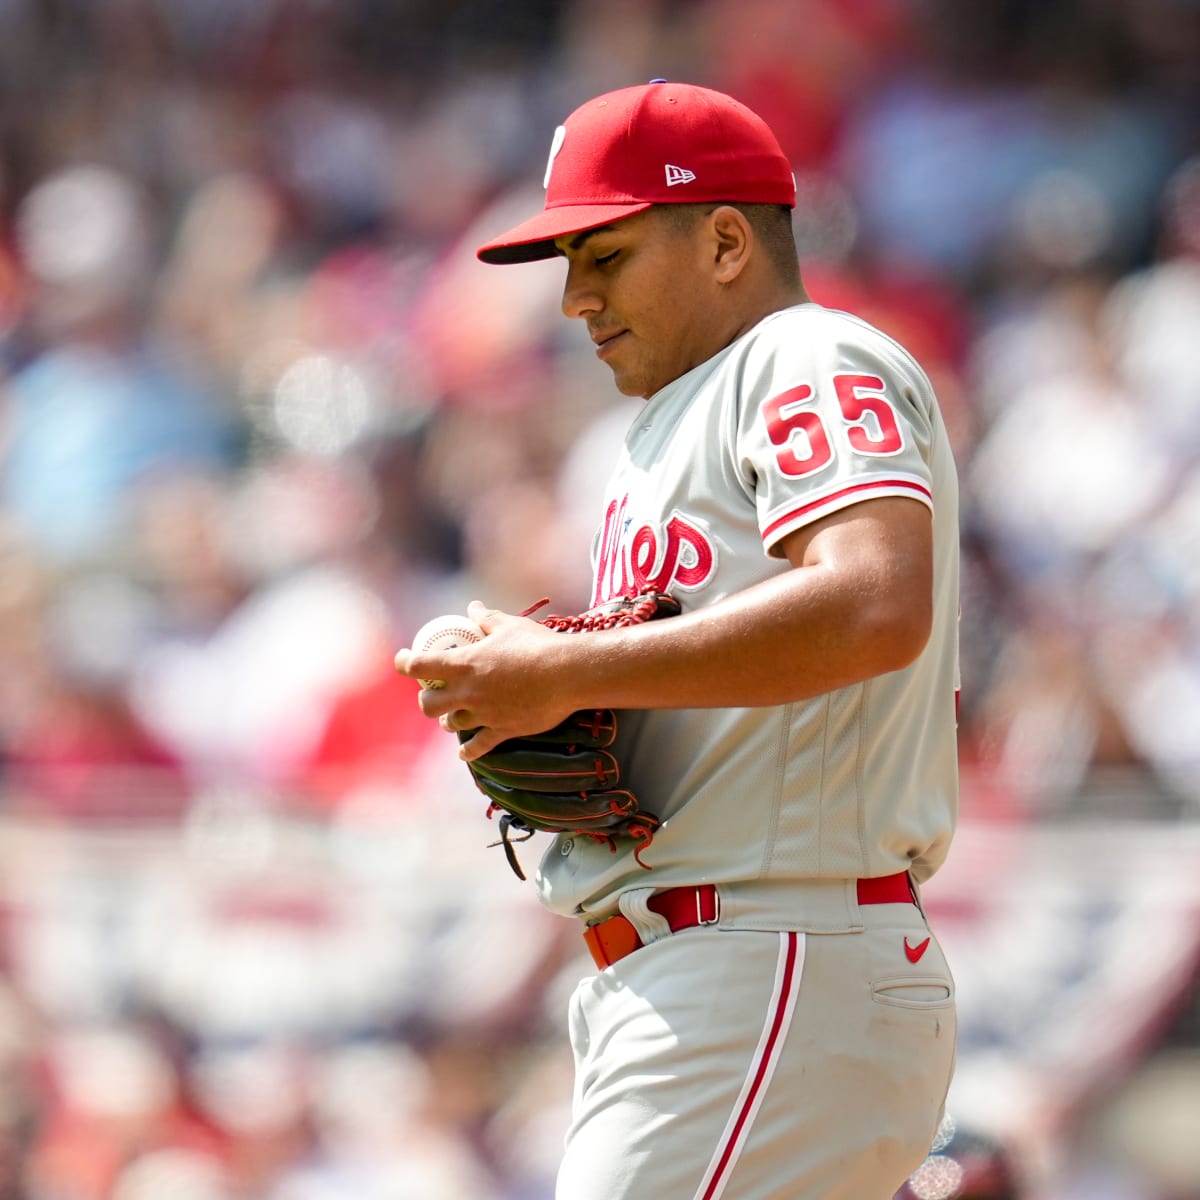 Phillies Season in Review: Ranger Suarez - Sports Illustrated